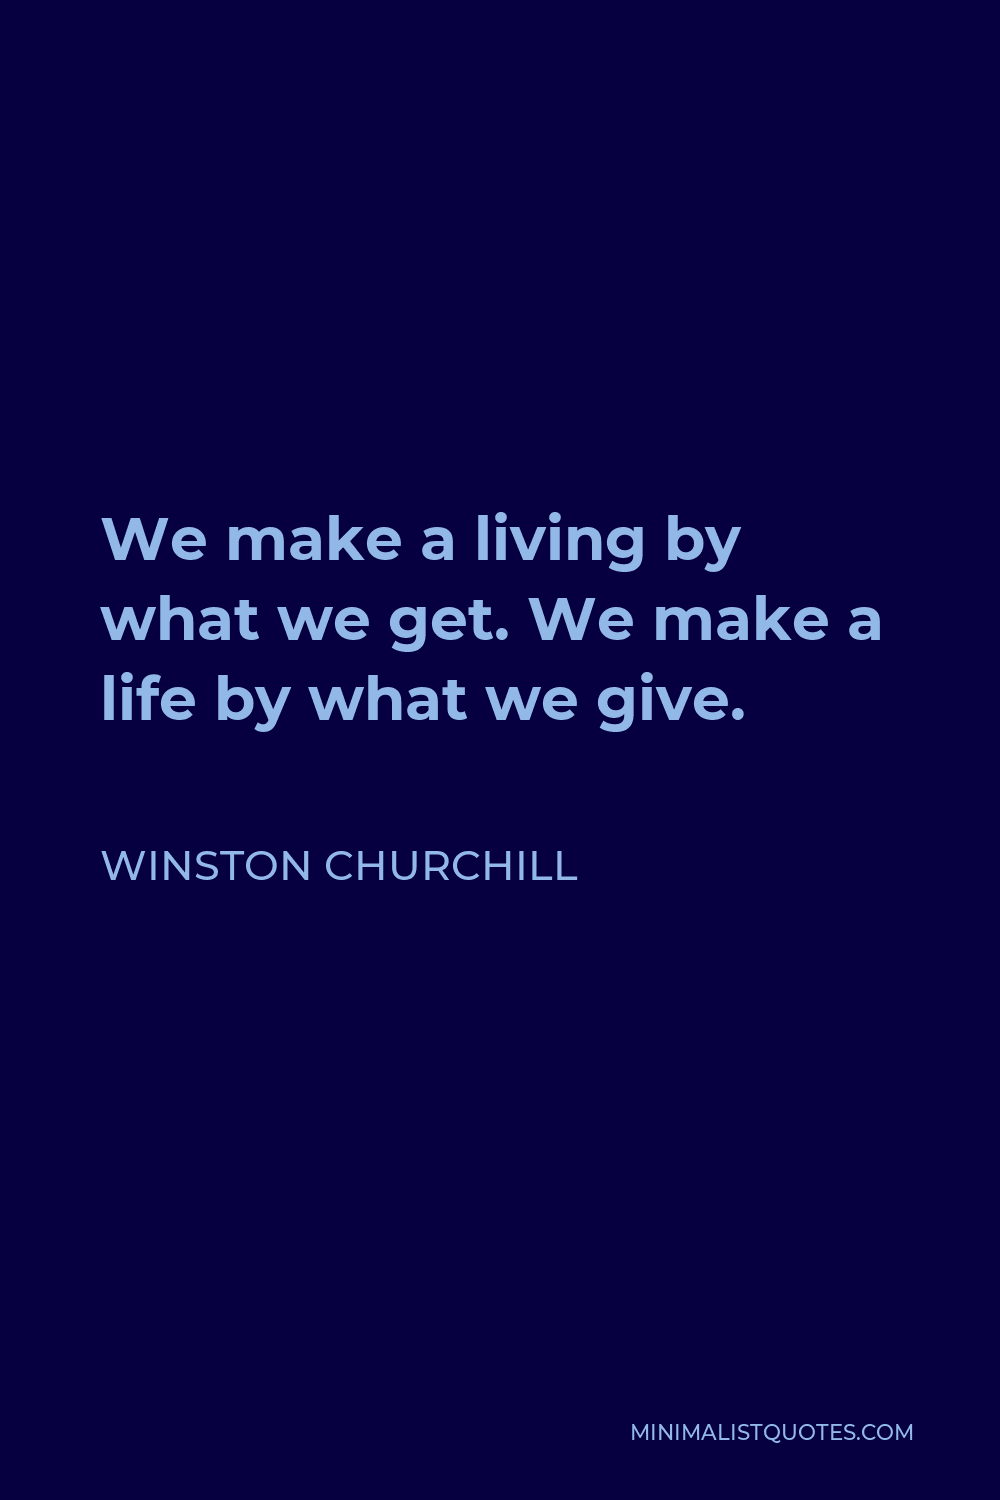 Winston Churchill Quote - We make a living by what we get. We make a life by what we give.